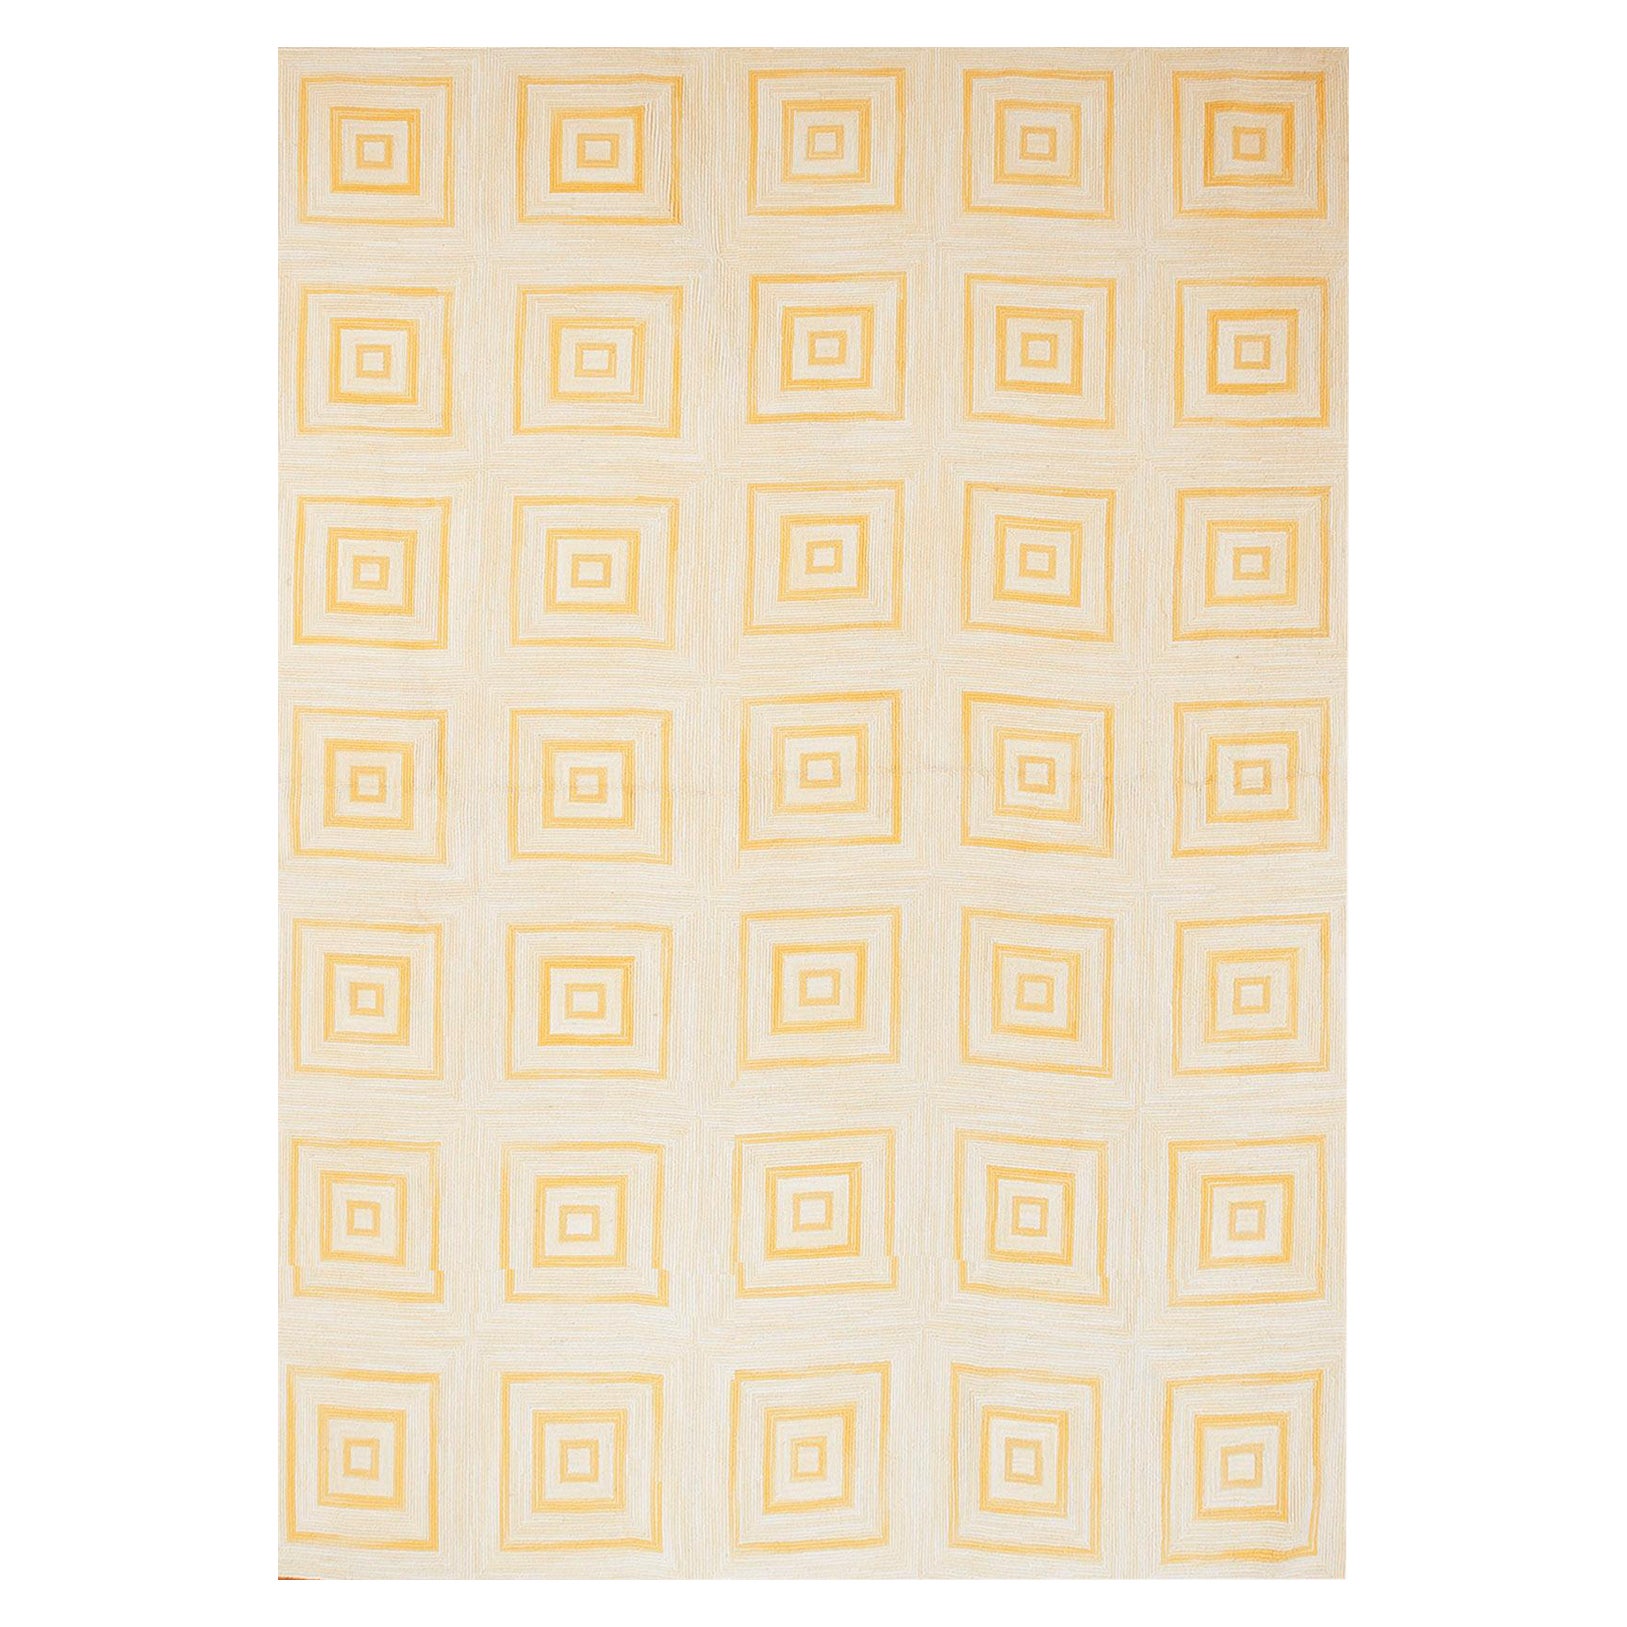 Contemporary Handmade Cotton Hooked Rug  ( 9' x 12' - 275 x 366 cm ) For Sale